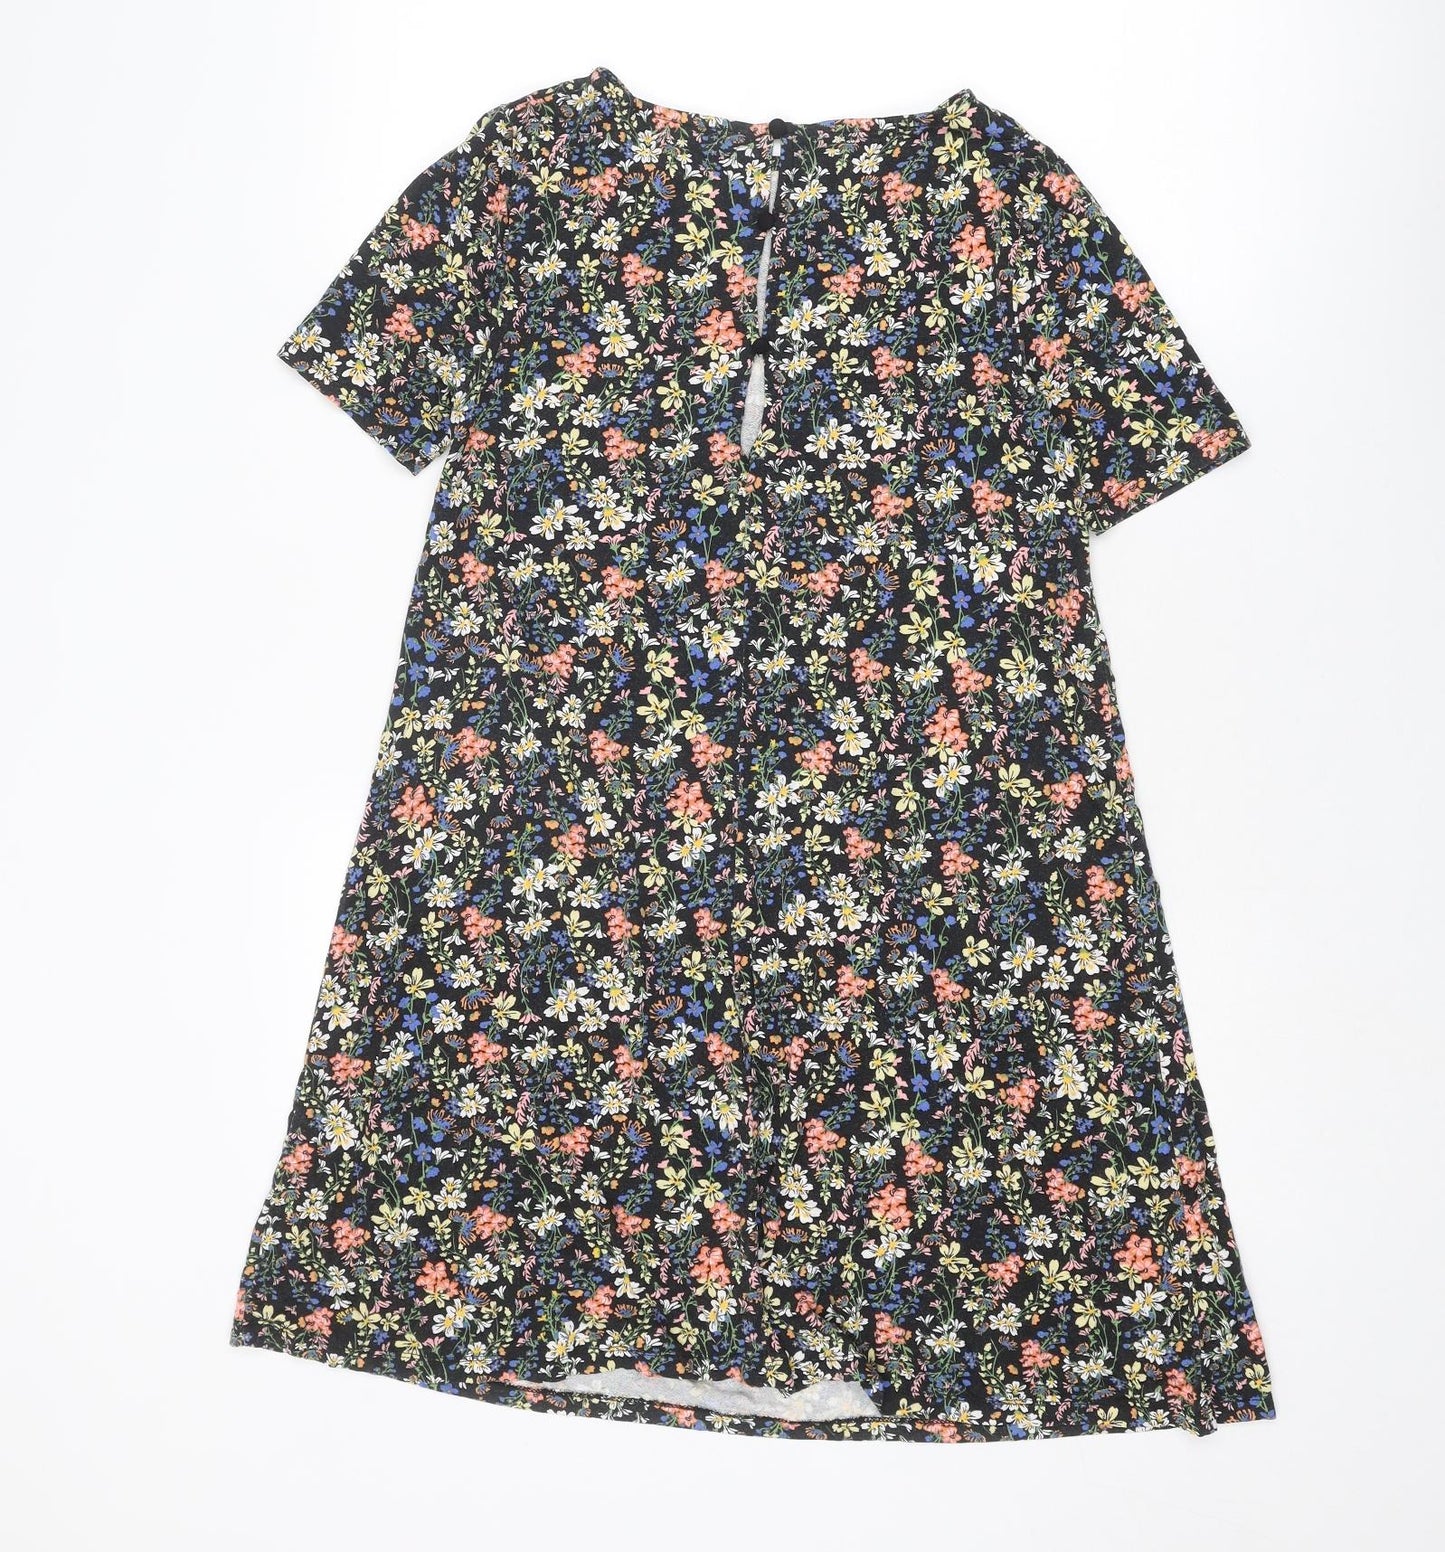 Pull&Bear Womens Multicoloured Floral Viscose T-Shirt Dress Size S Round Neck Button